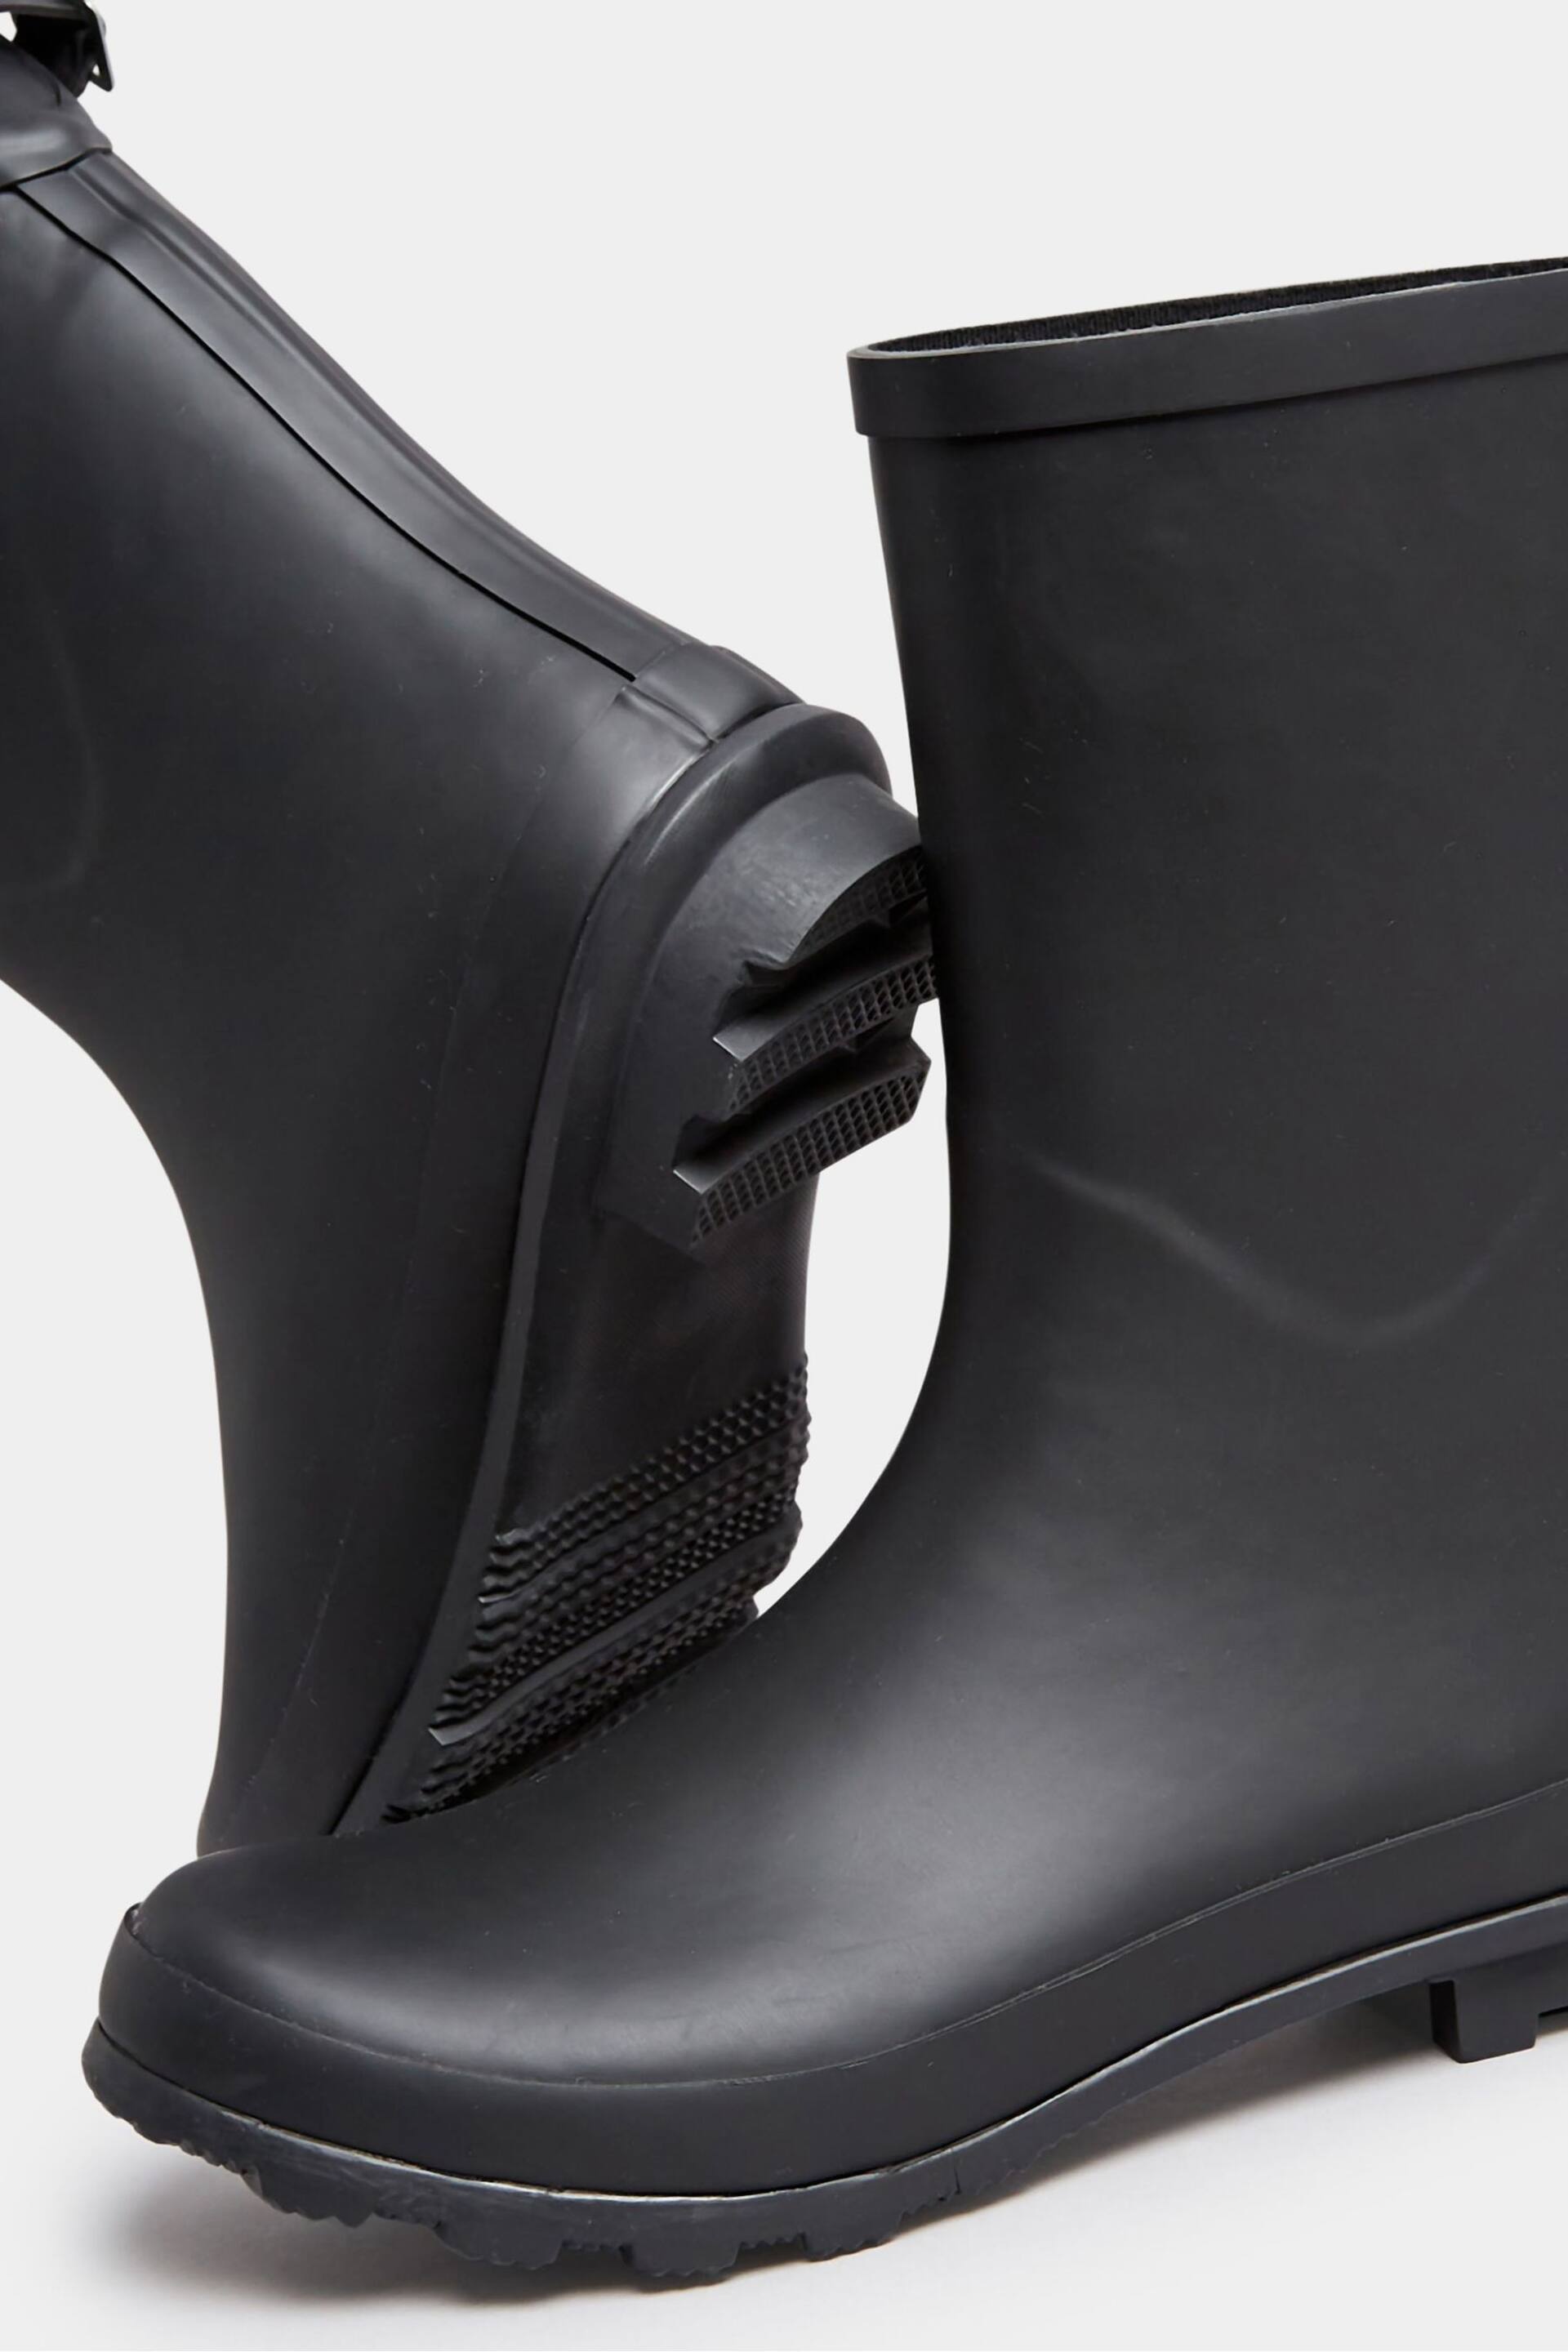 Yours Curve Black Wide Fit Mid Calf Adjustable Welly Boots - Image 3 of 4